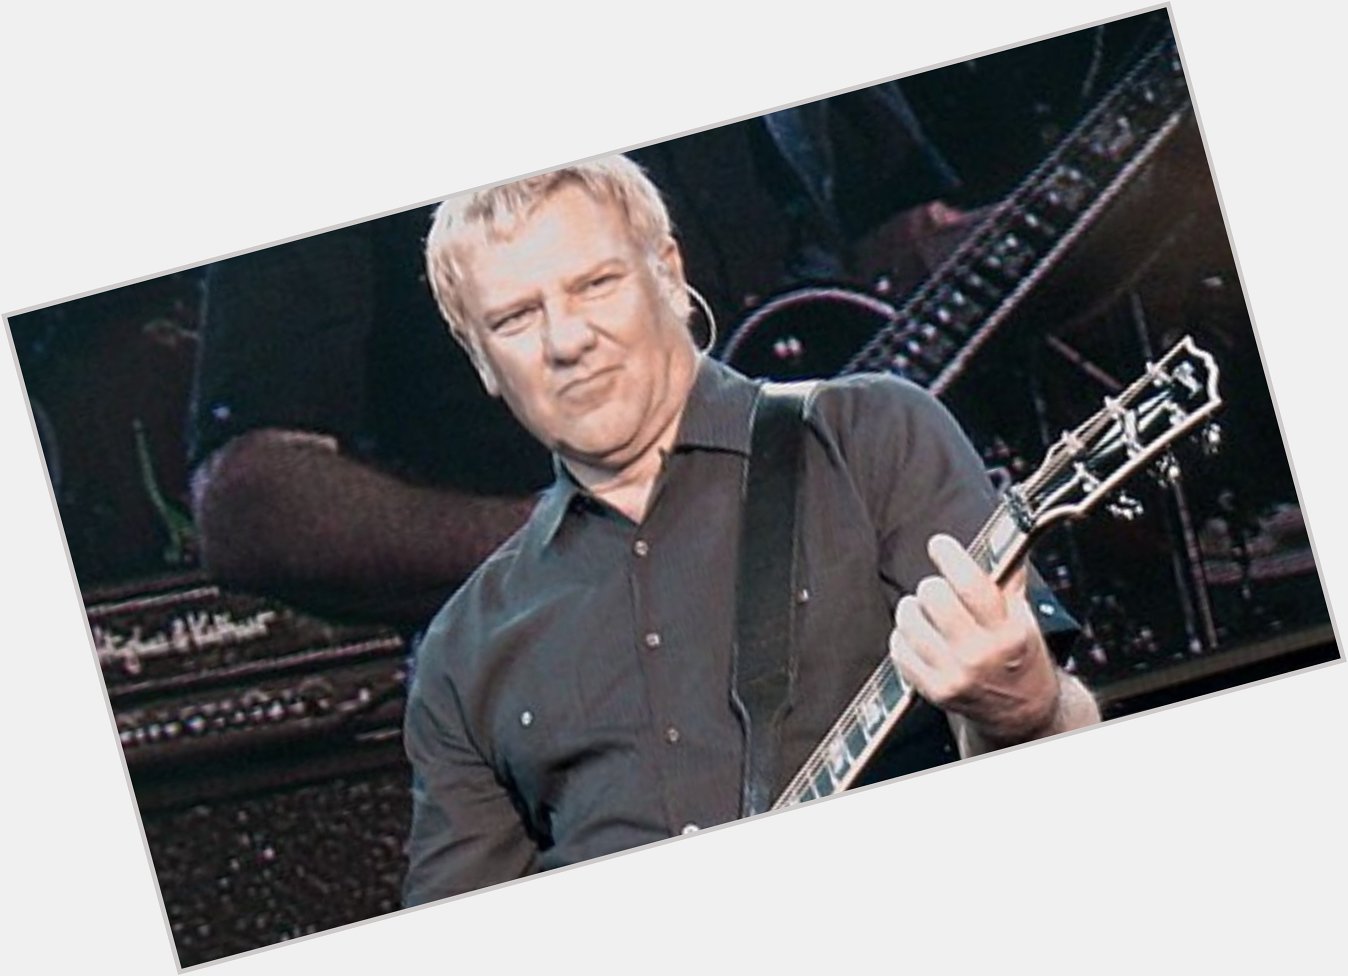 Happy Birthday Alex Lifeson. One of the greatest guitarists of all time. 